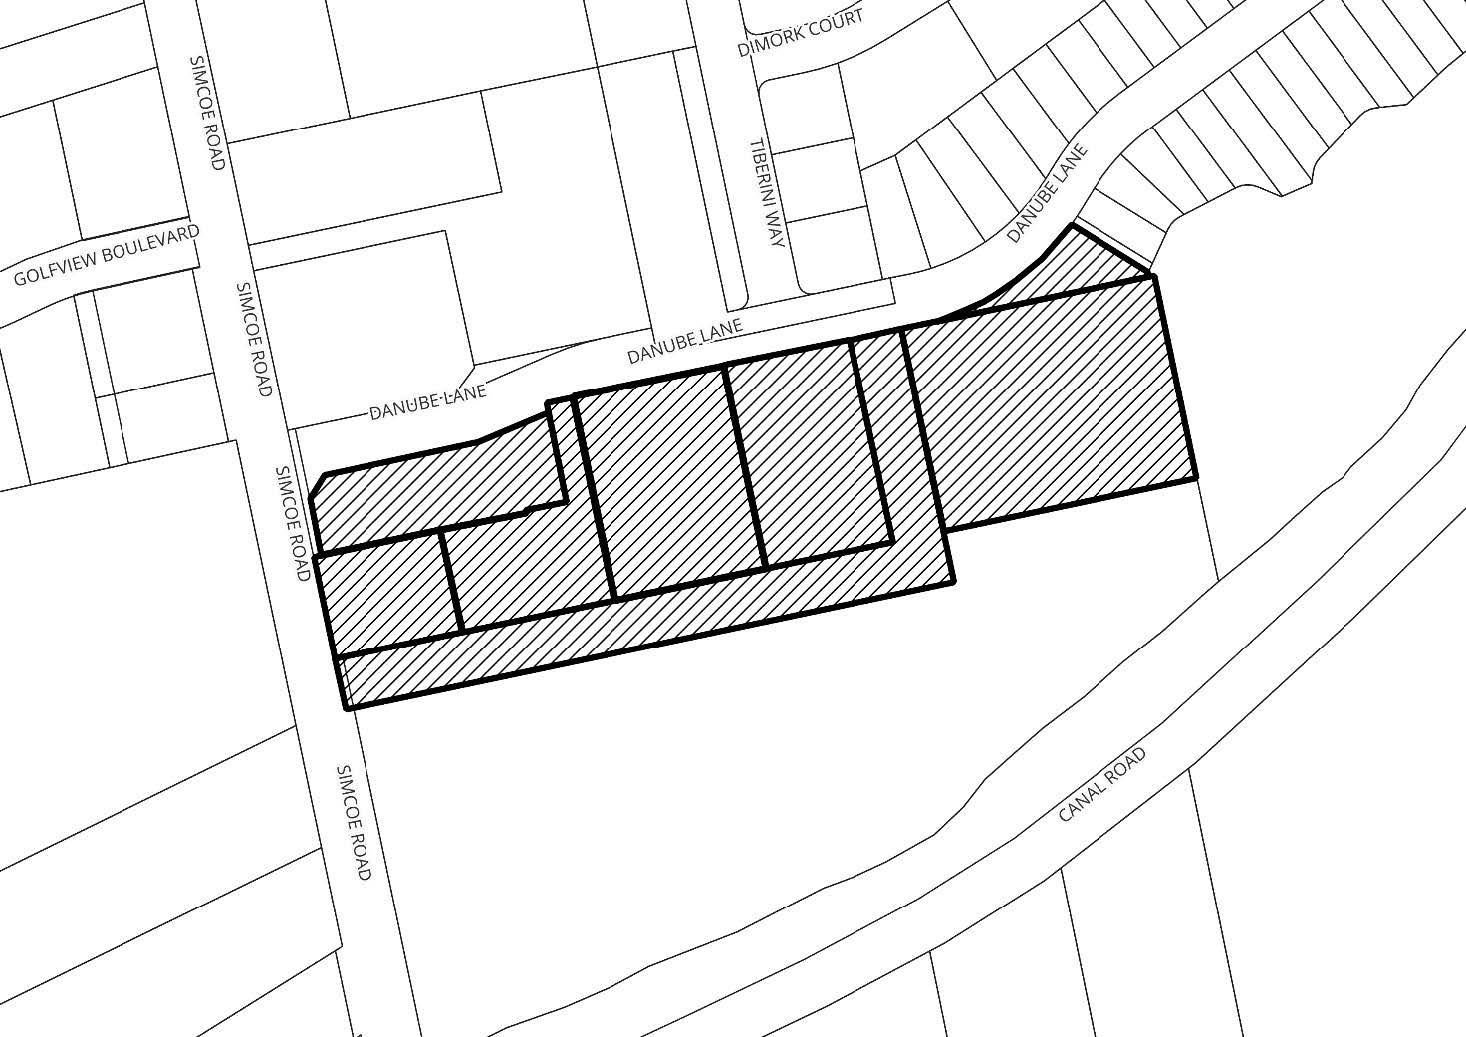 Map of Proposed Official Plan and Zoning By-law Amendments showing Simcoe Road and Danube Lane